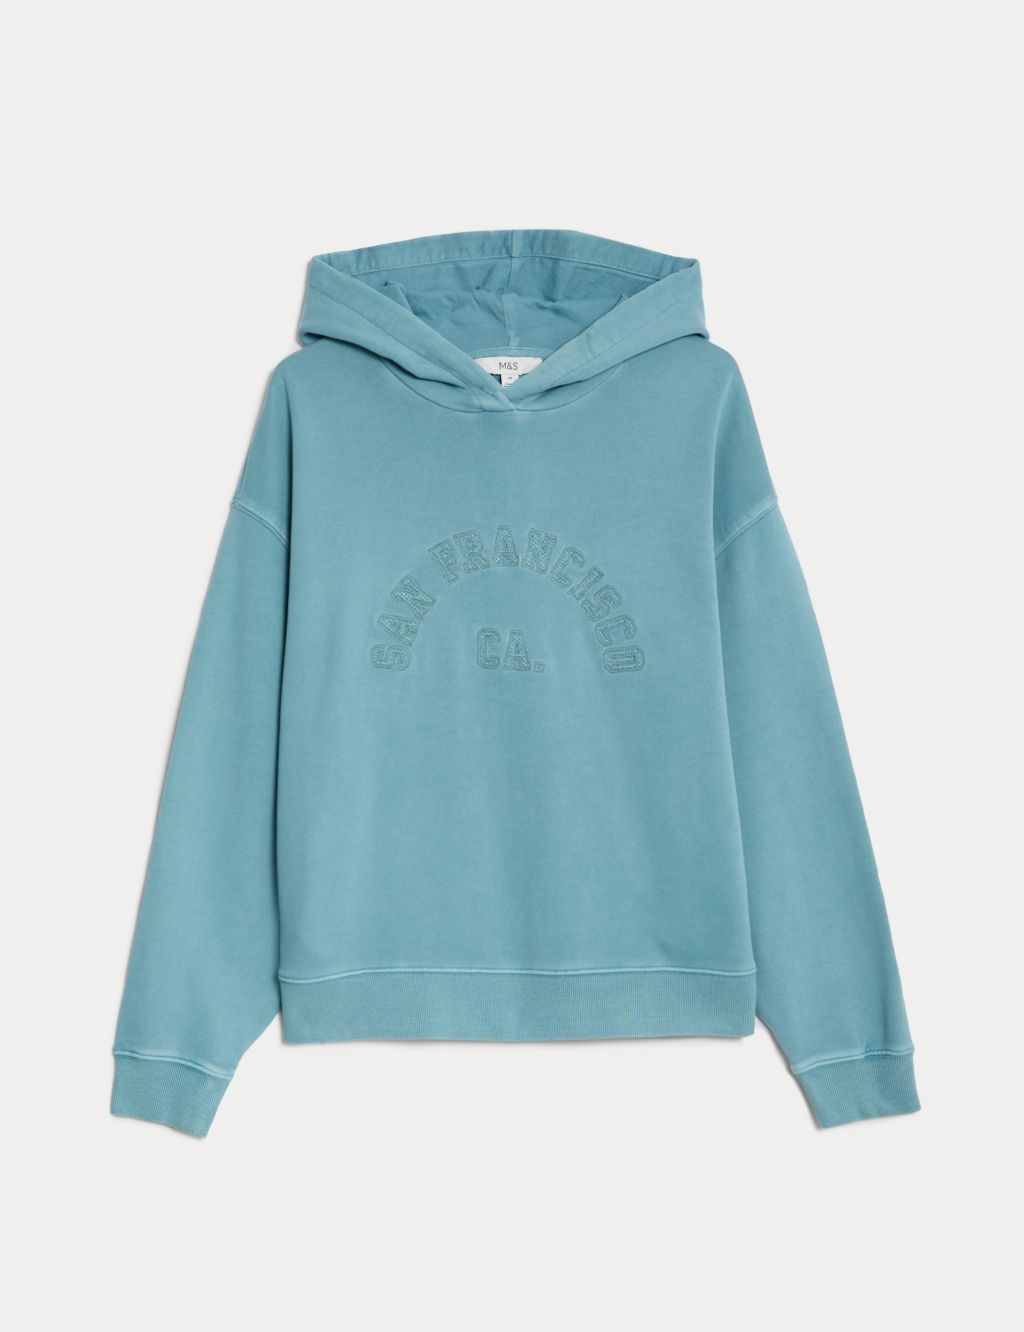 Pure Cotton Embroidered Hoodie image 2